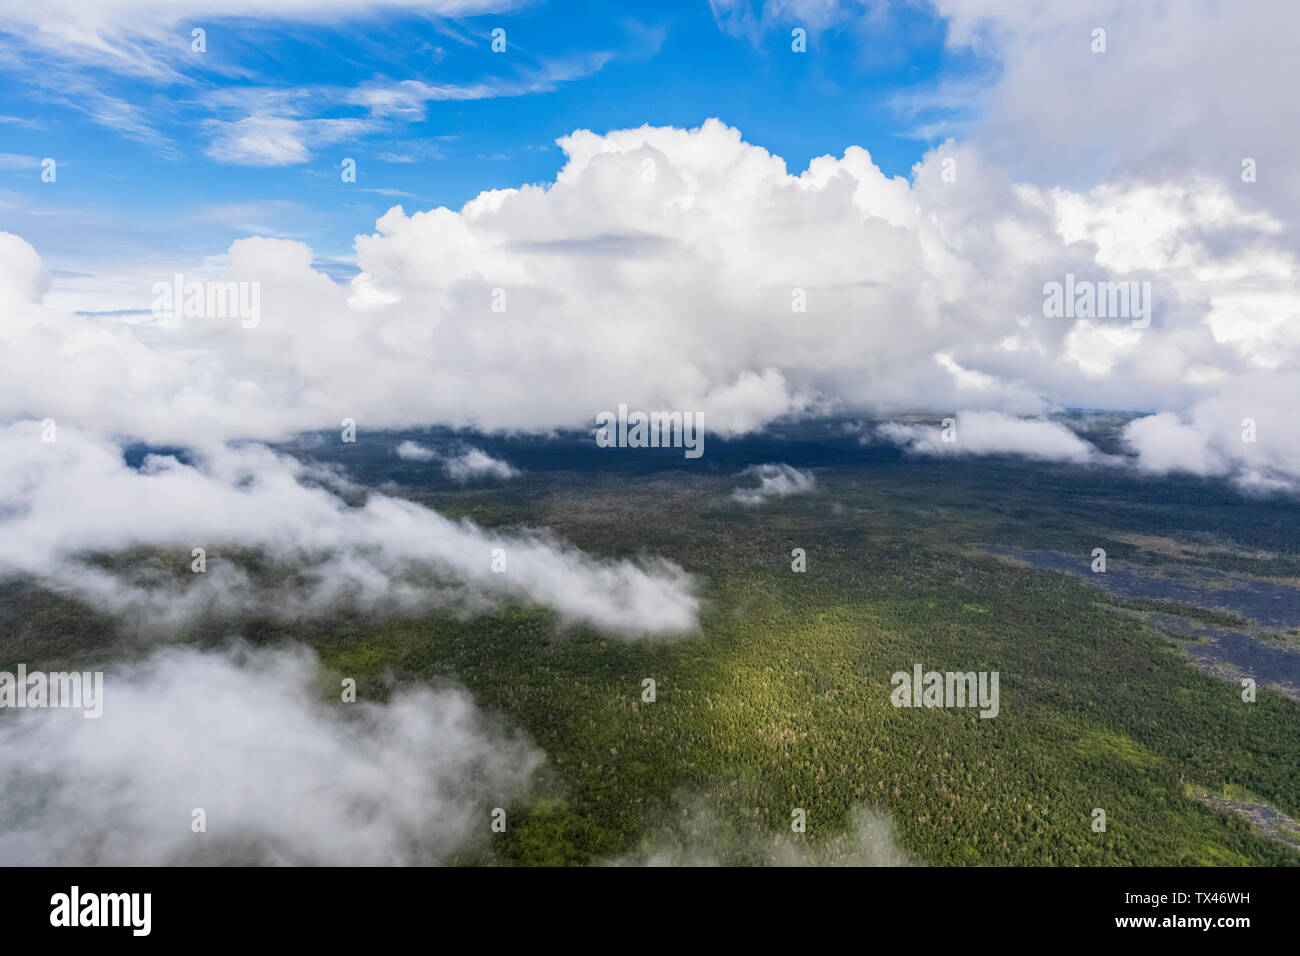 USA, Hawaii, Big Island, aerial view of Puna Forest Reserve Stock Photo